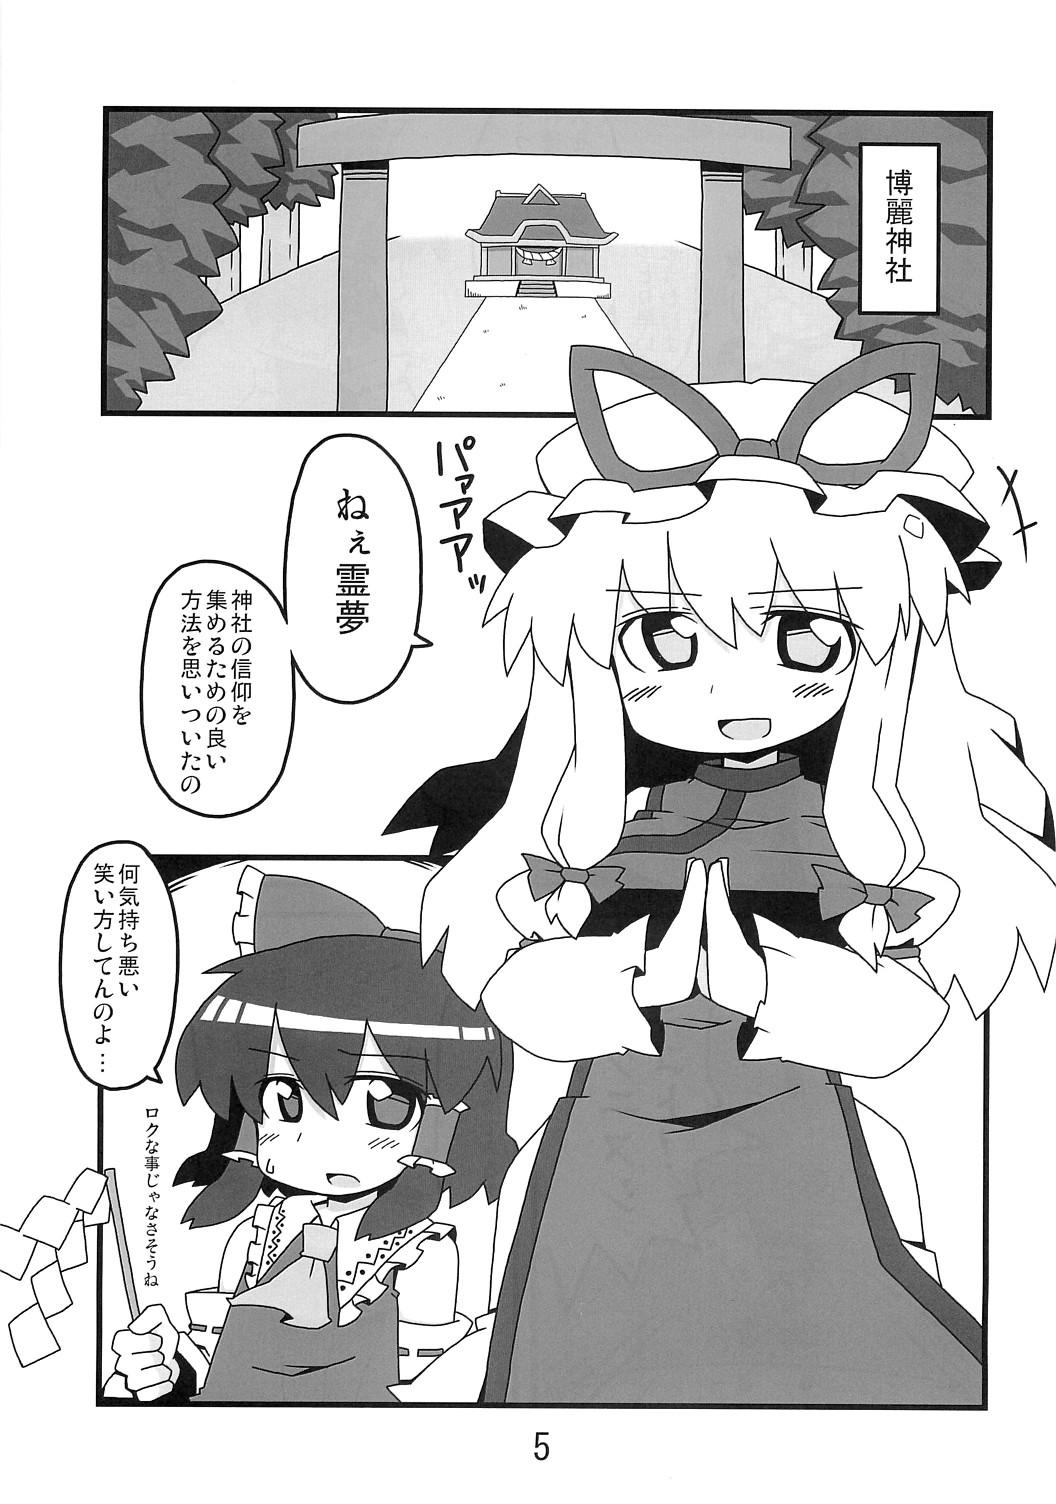 Dominicana 東方豊年祭 - Touhou project Femdom - Page 4